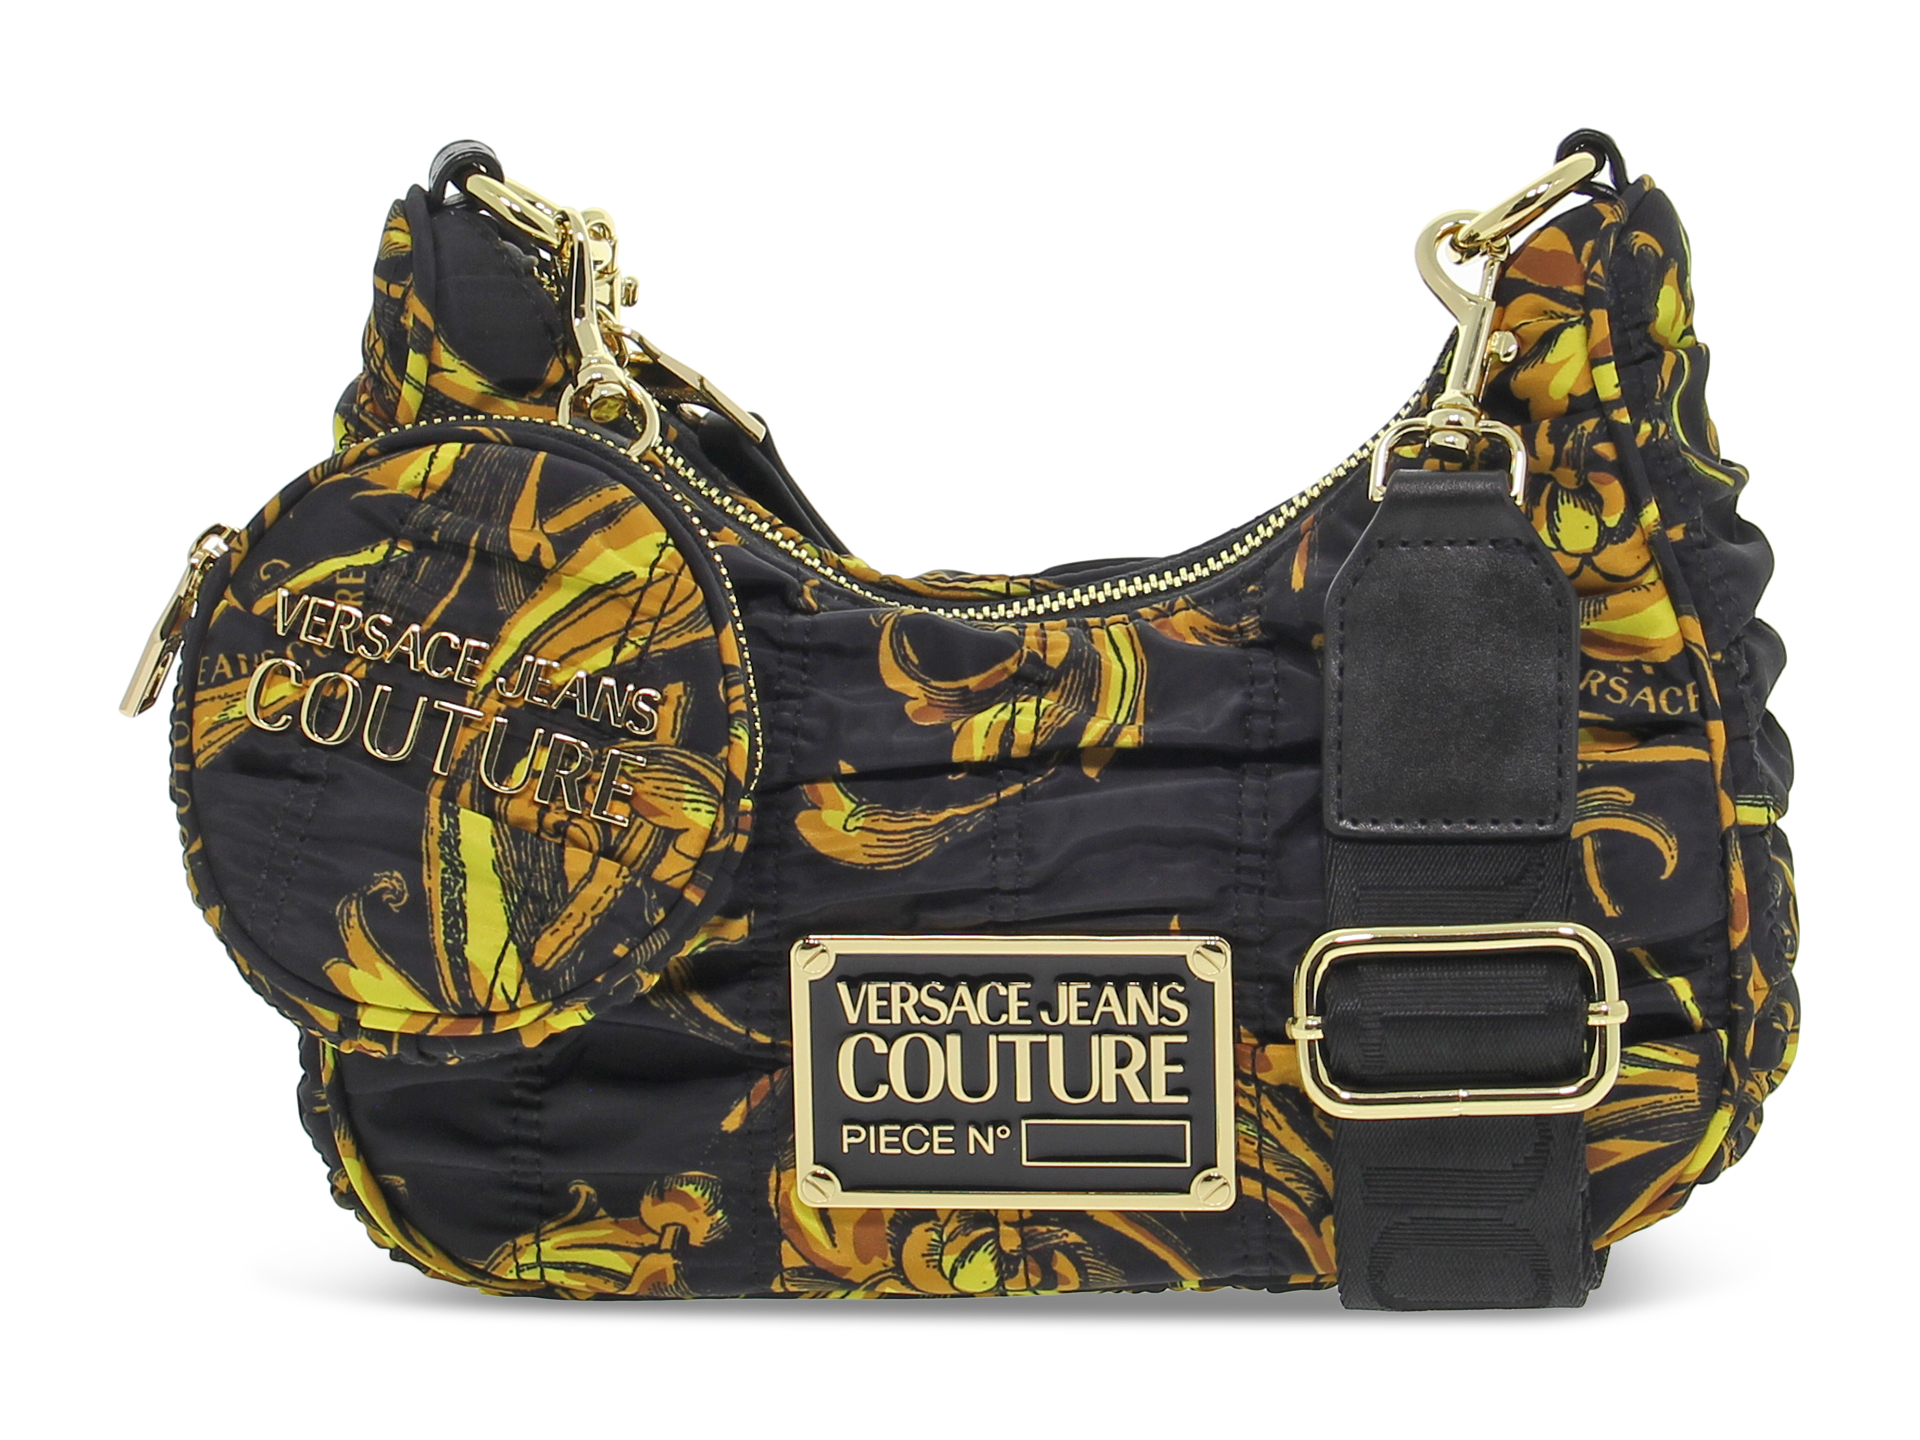 Versace Jeans Couture Handbags - Fall - Winter 2022/23